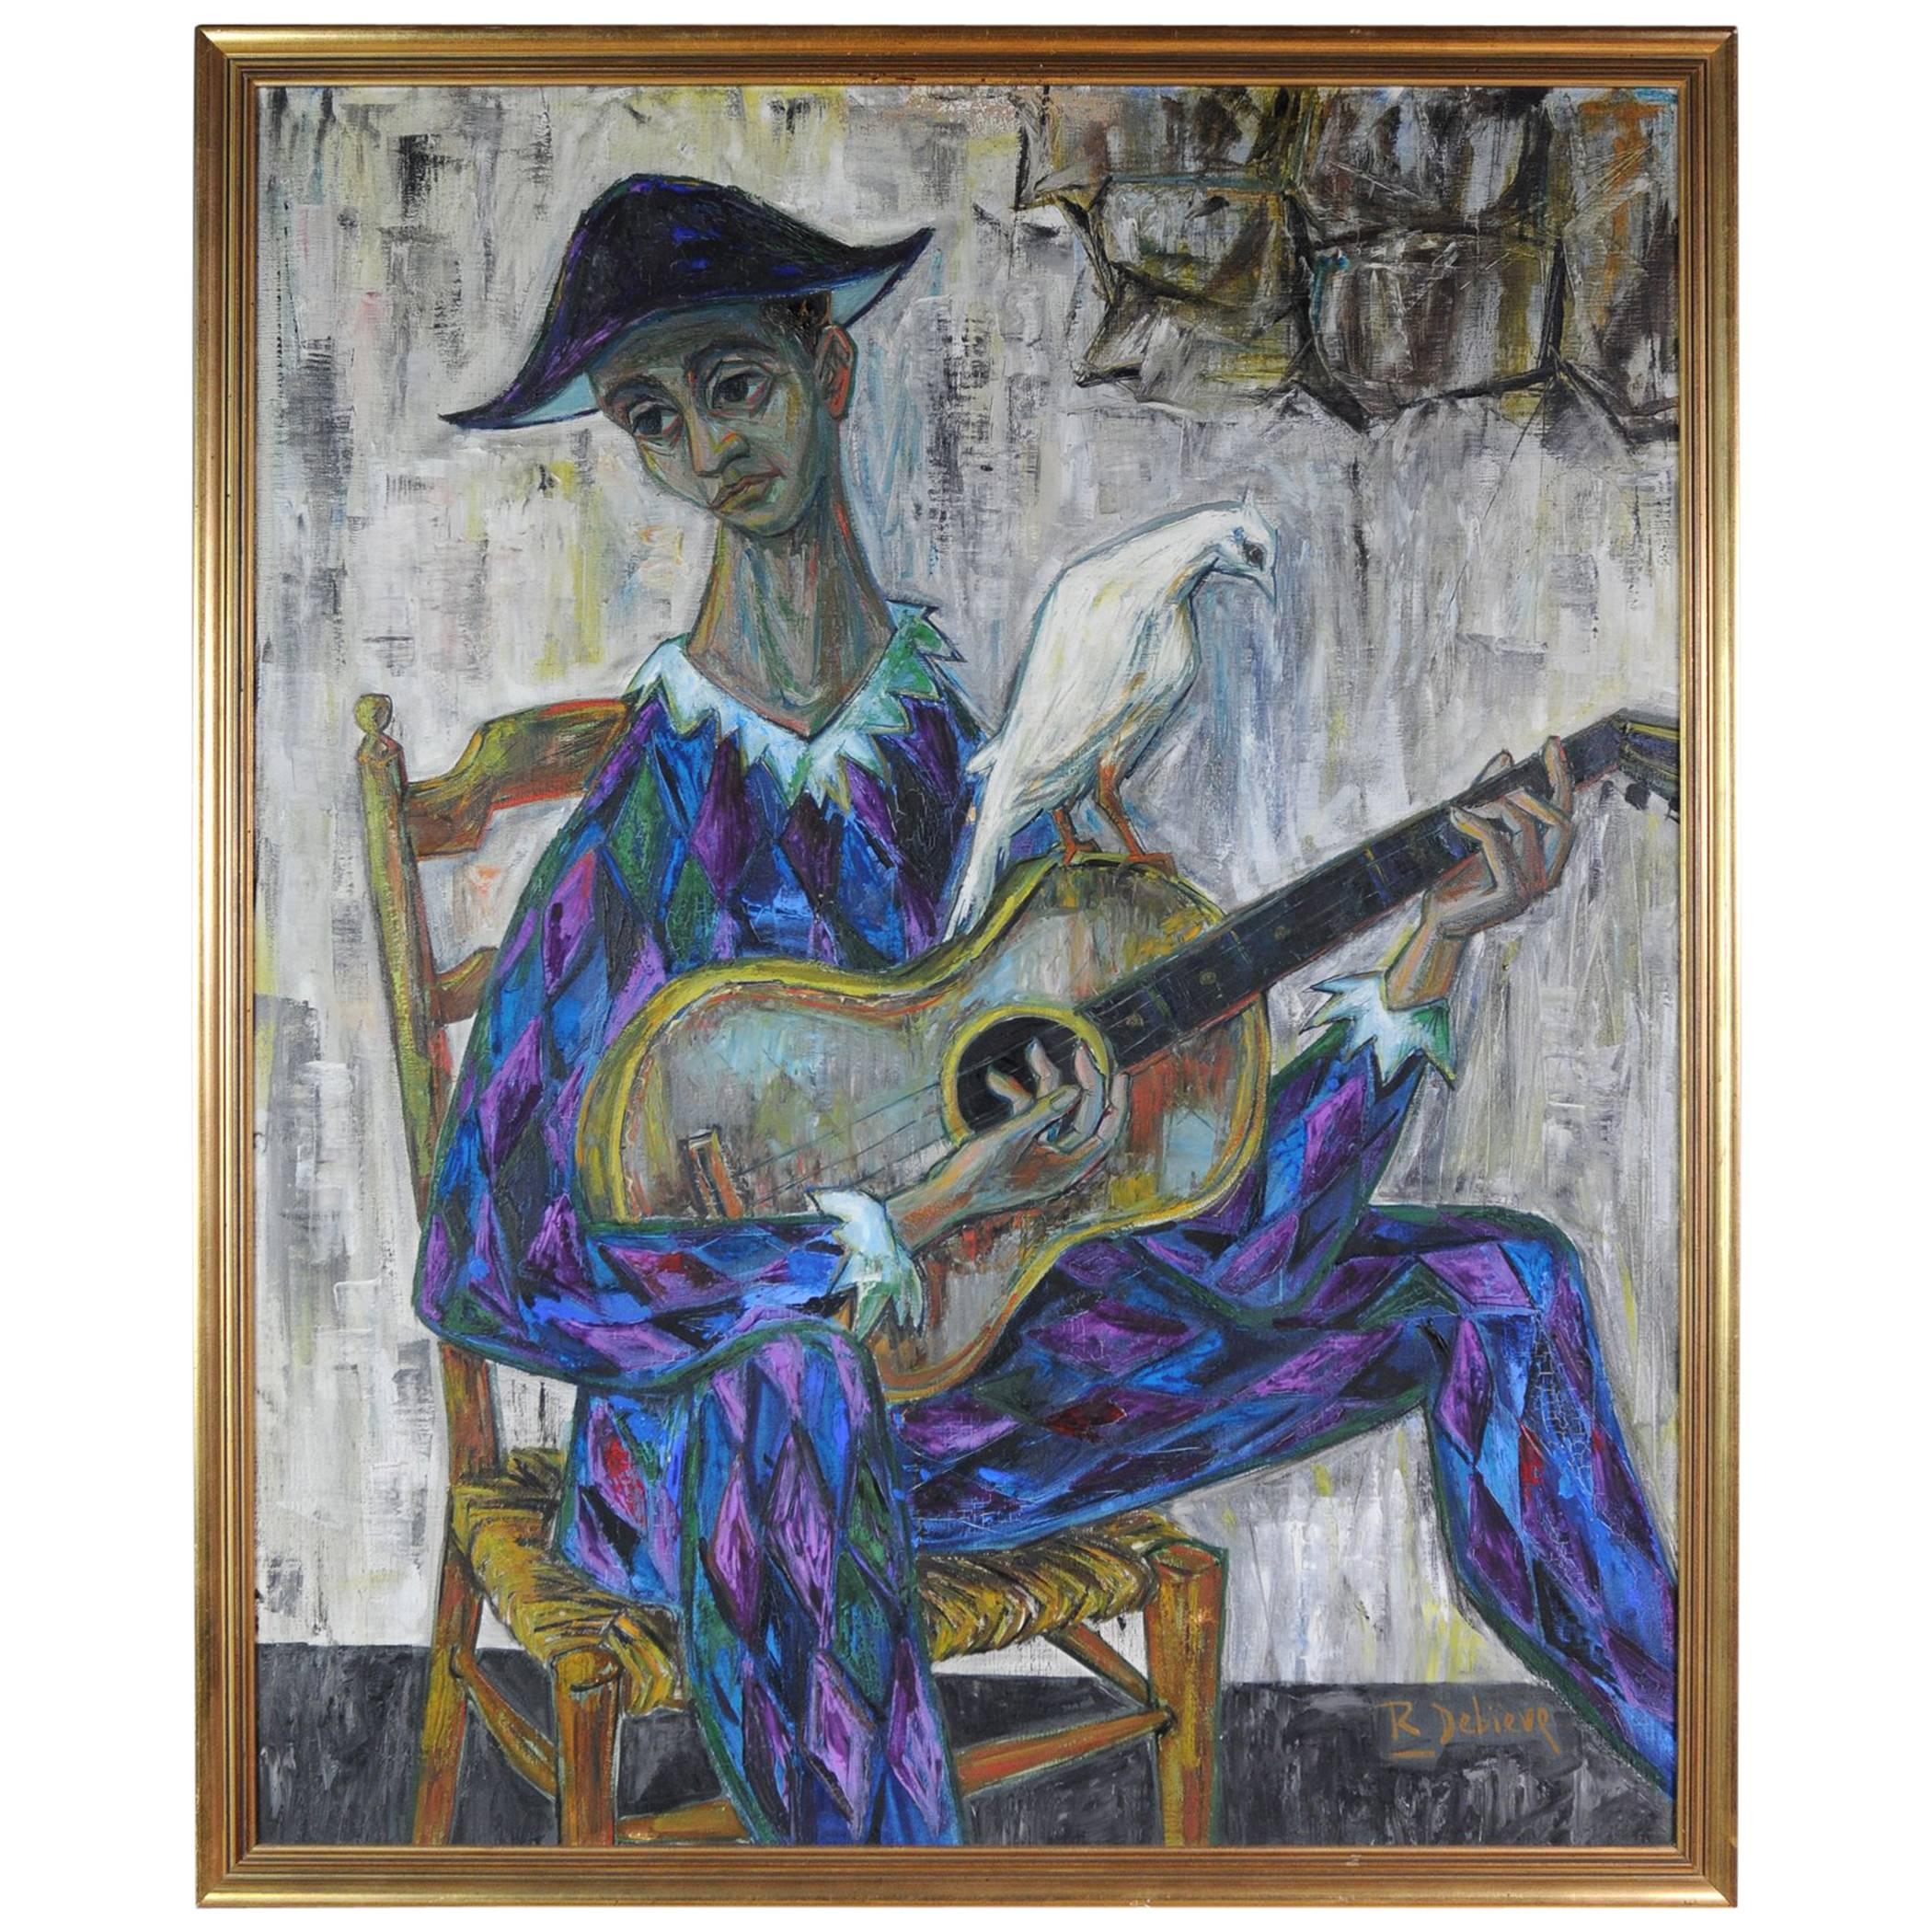 "The Harlequin with Dove", Robert Debiève's Oil on Canvas, France, 1957